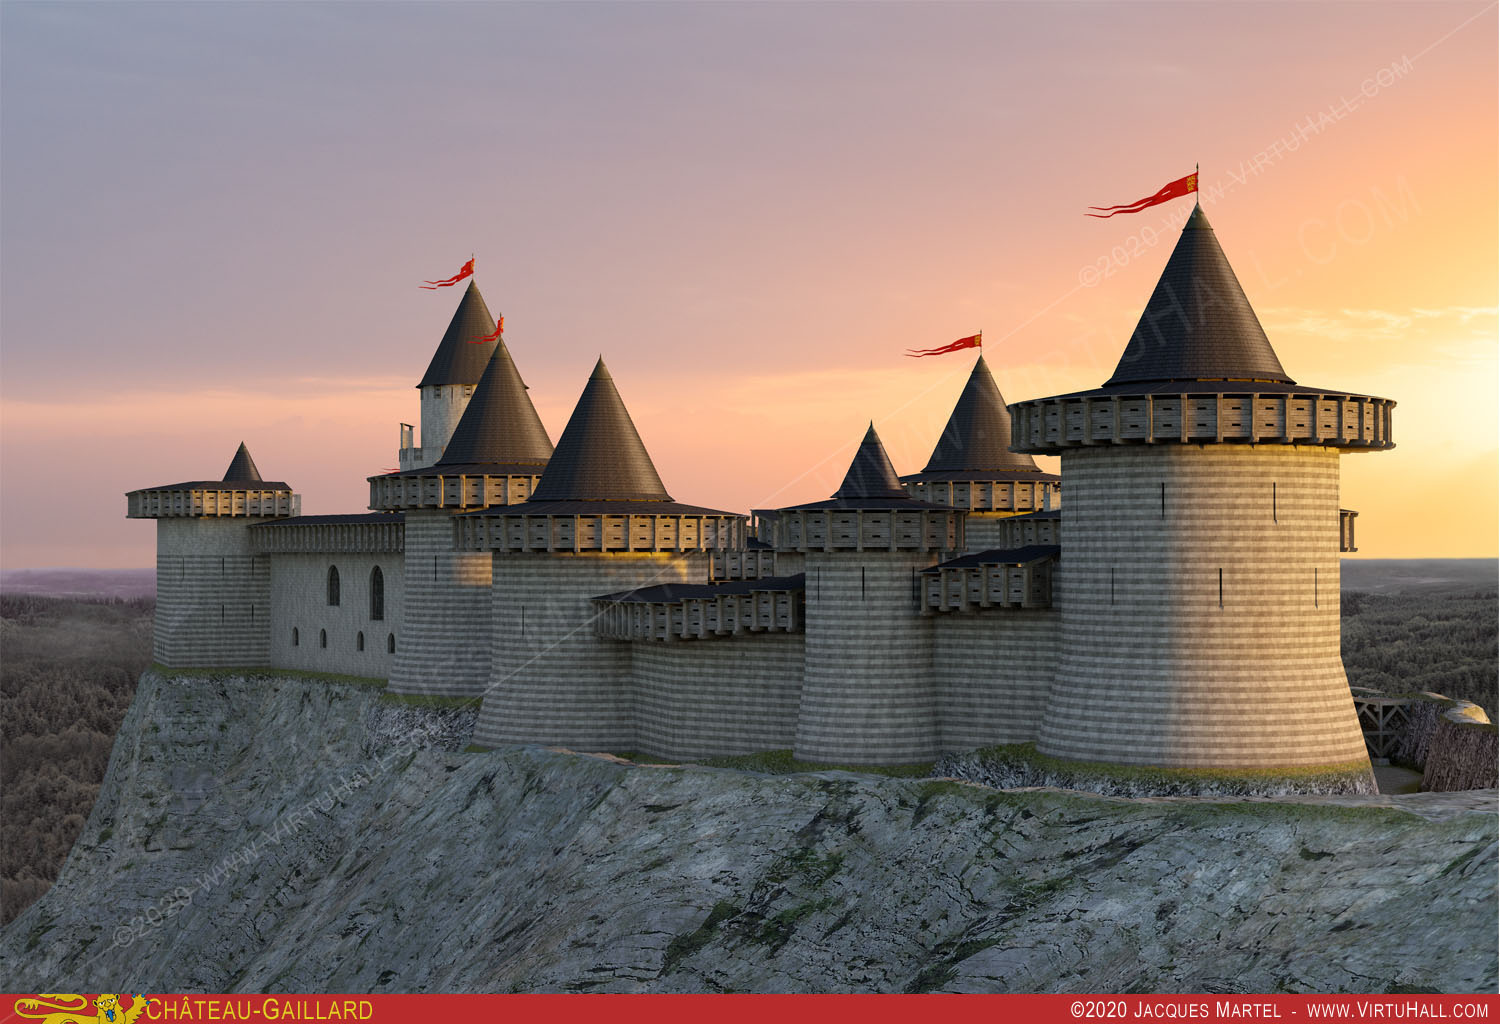 Chateau gailard, the fortress of Richard the Lionheart, reconstitued - At dawn